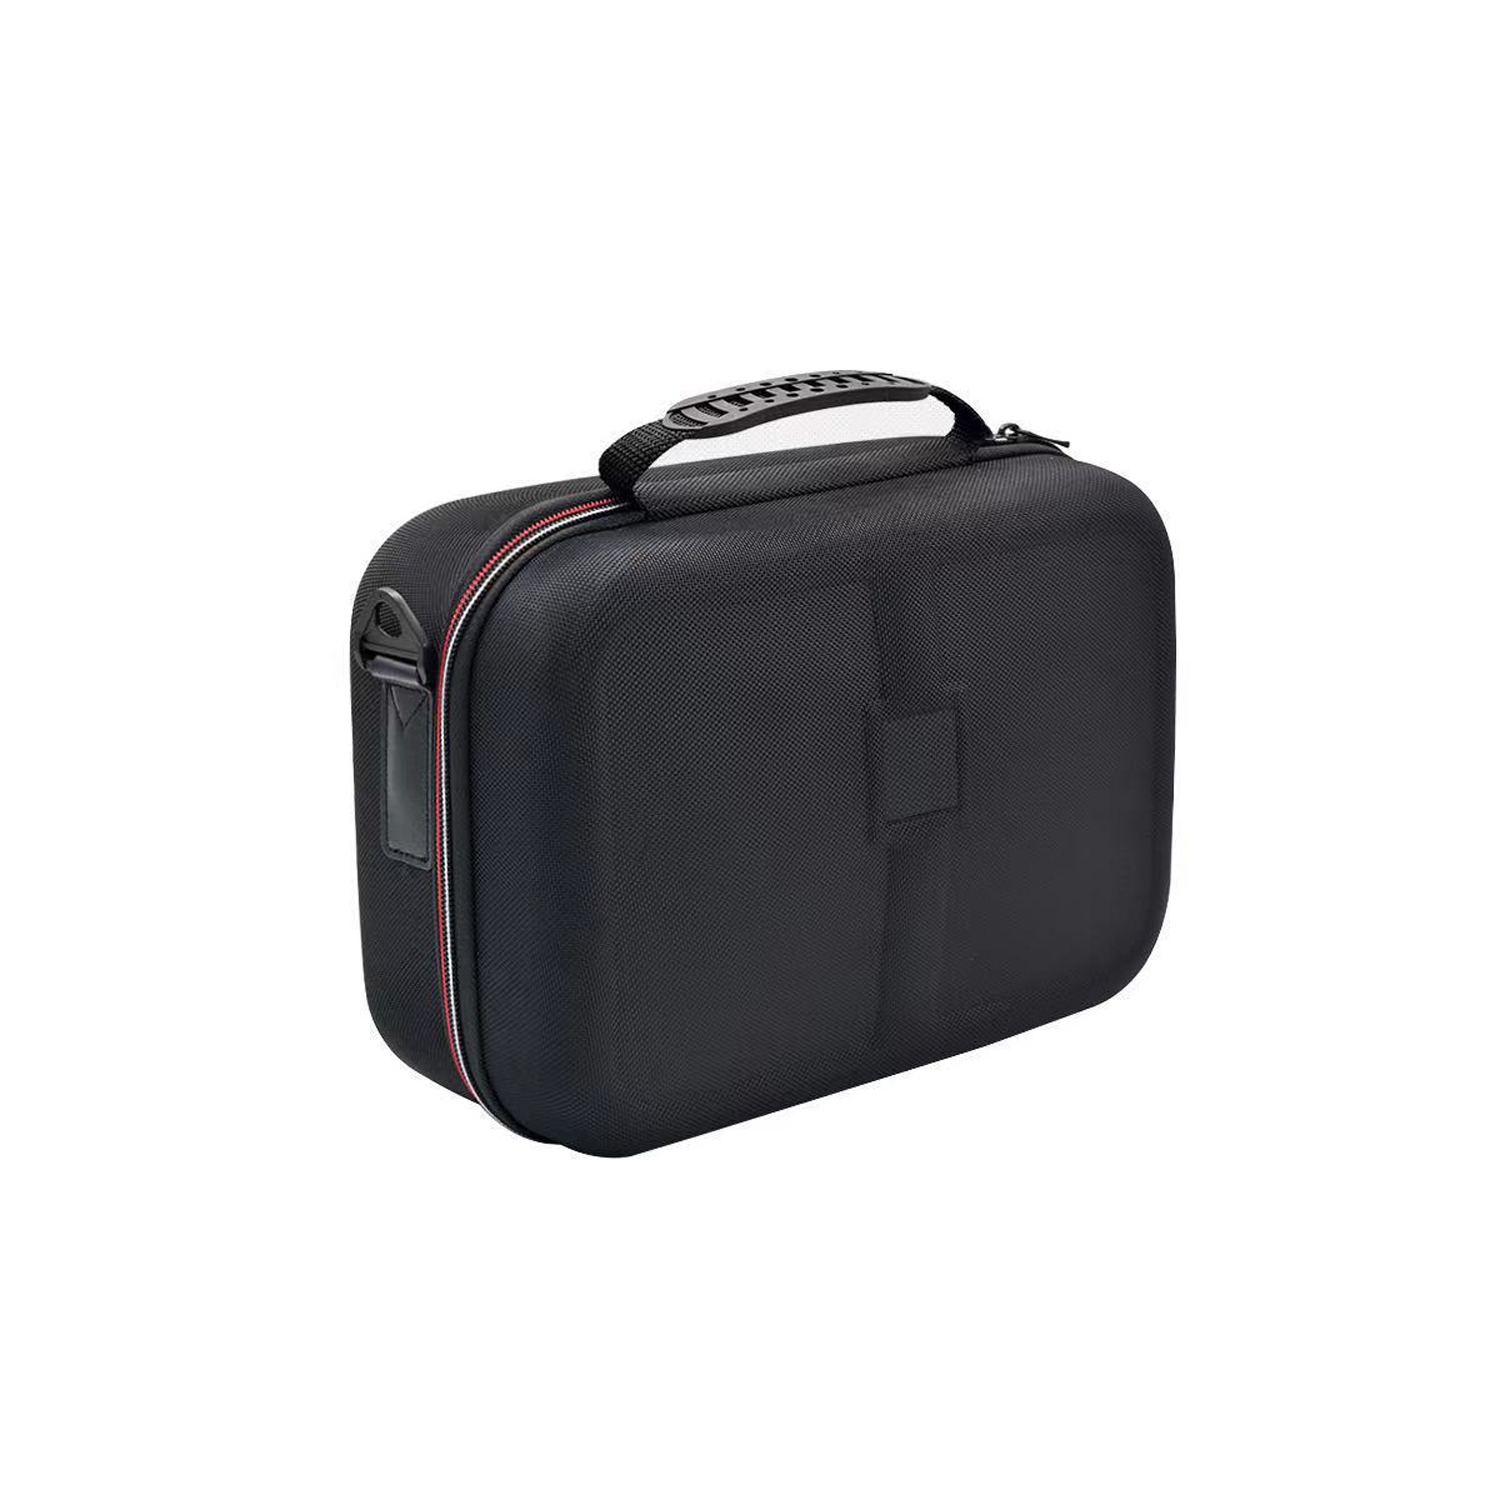 Carrying Storage Case Compatible with Nintendo Switch with 18 Game Cartridges Protective Hard Shell Travel Bag Pouch - axGear